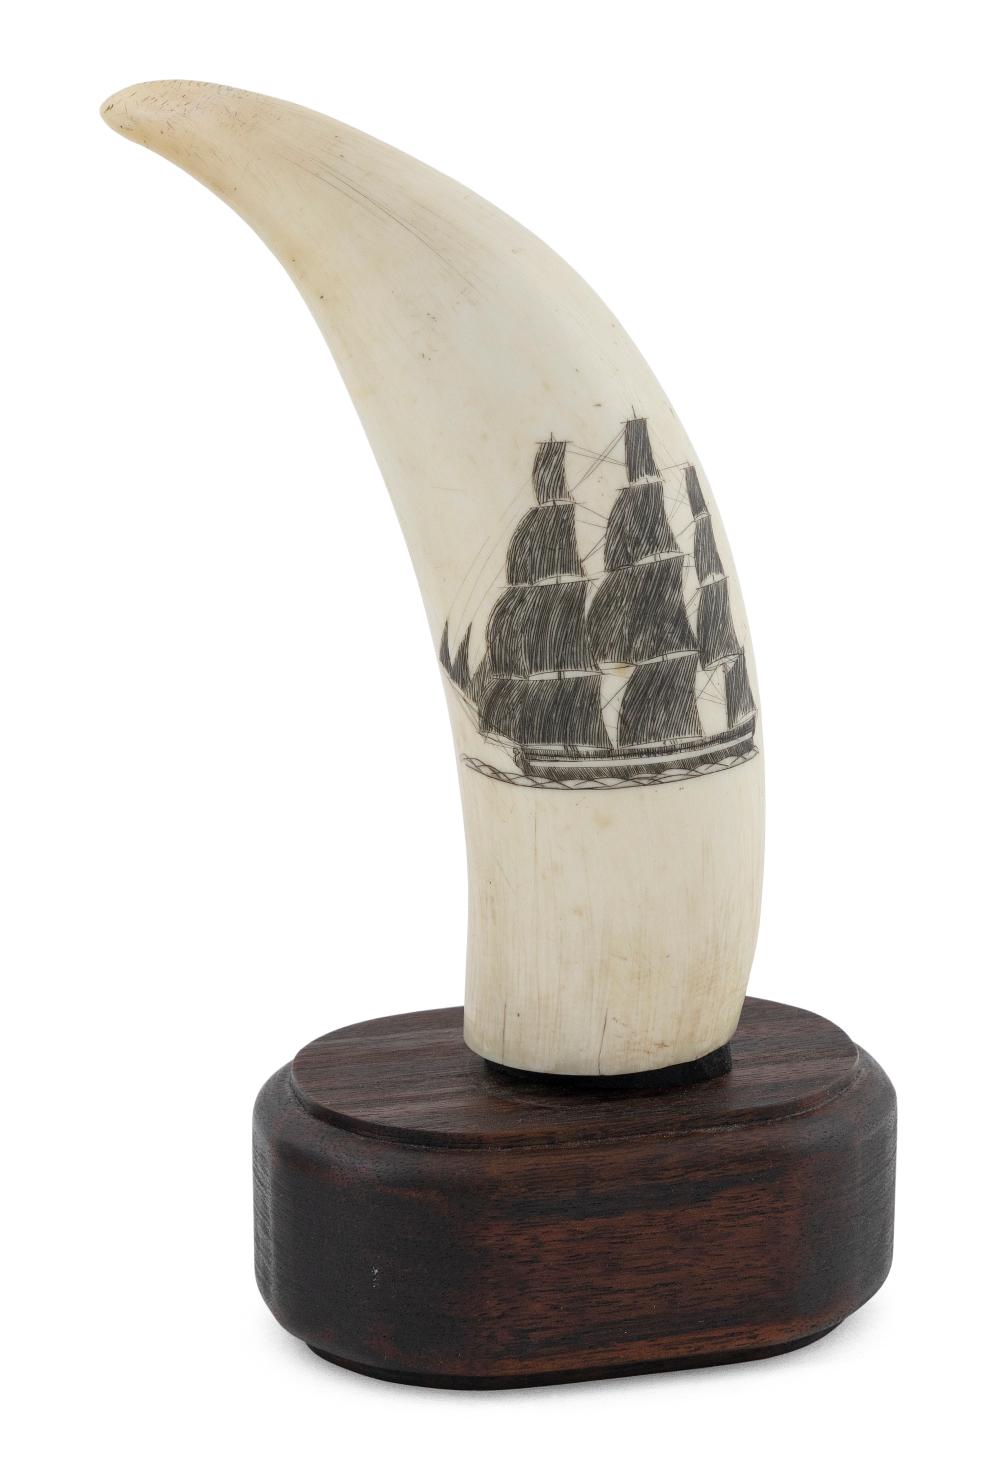 SCRIMSHAW WHALE S TOOTH WITH CLIPPER 35019c